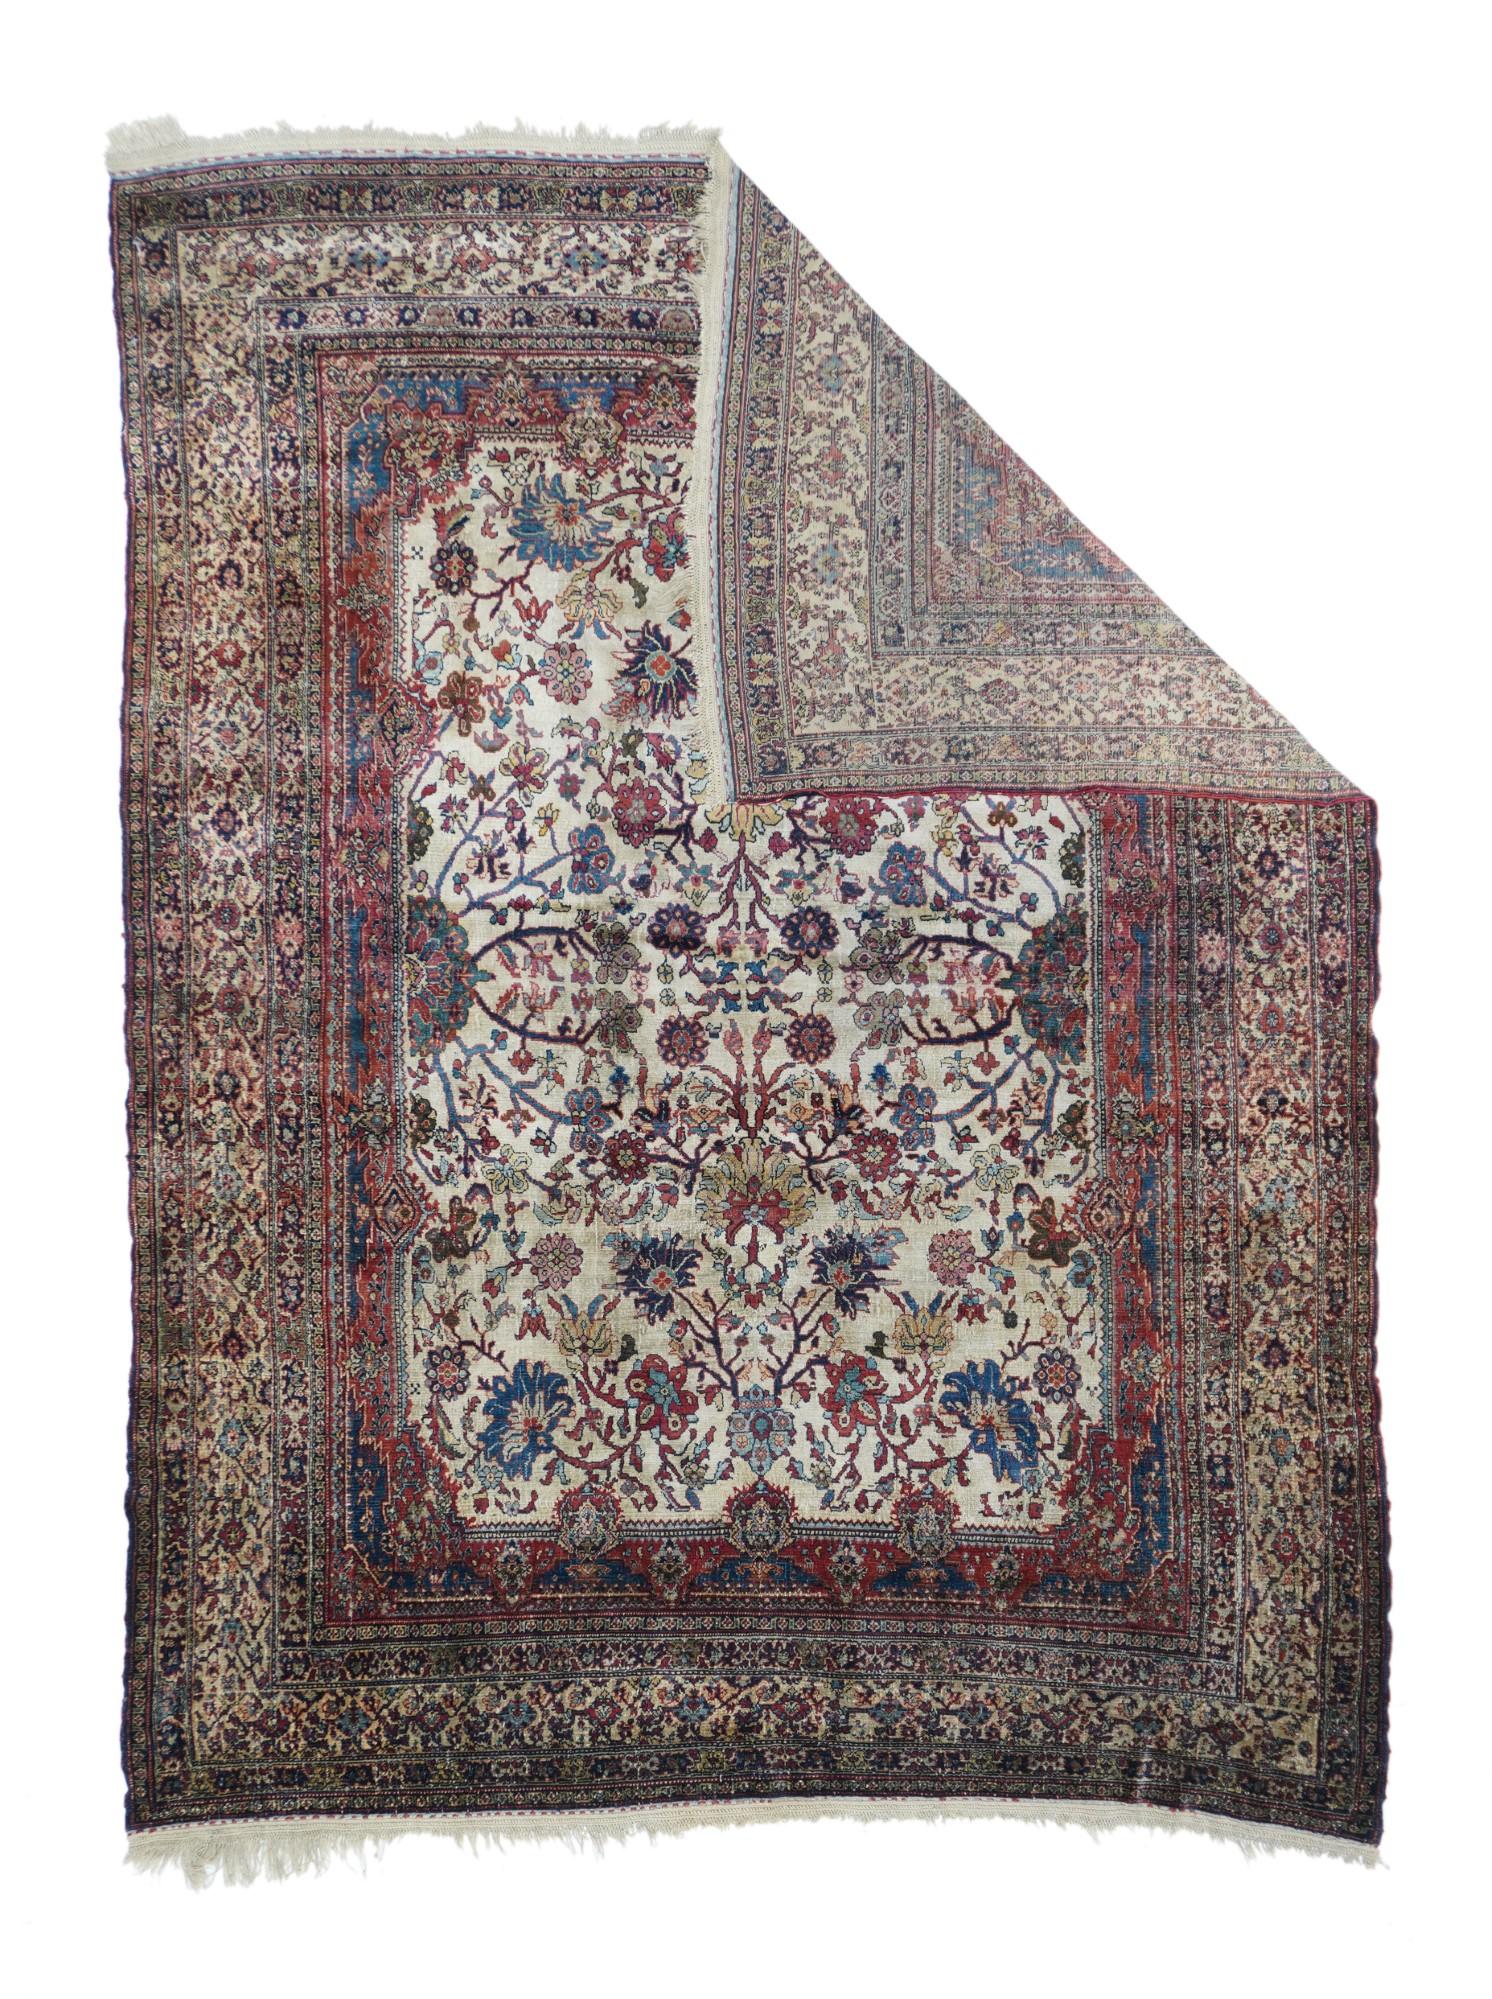 We attribute this silk-pile, finely woven scatter to the west Persian Kurdistan town of Senneh, although it may be more of a Senneh-baf (Senneh-weave) Tabriz from further to the northwest. The sand field shows a pallmette, rosette and short stem